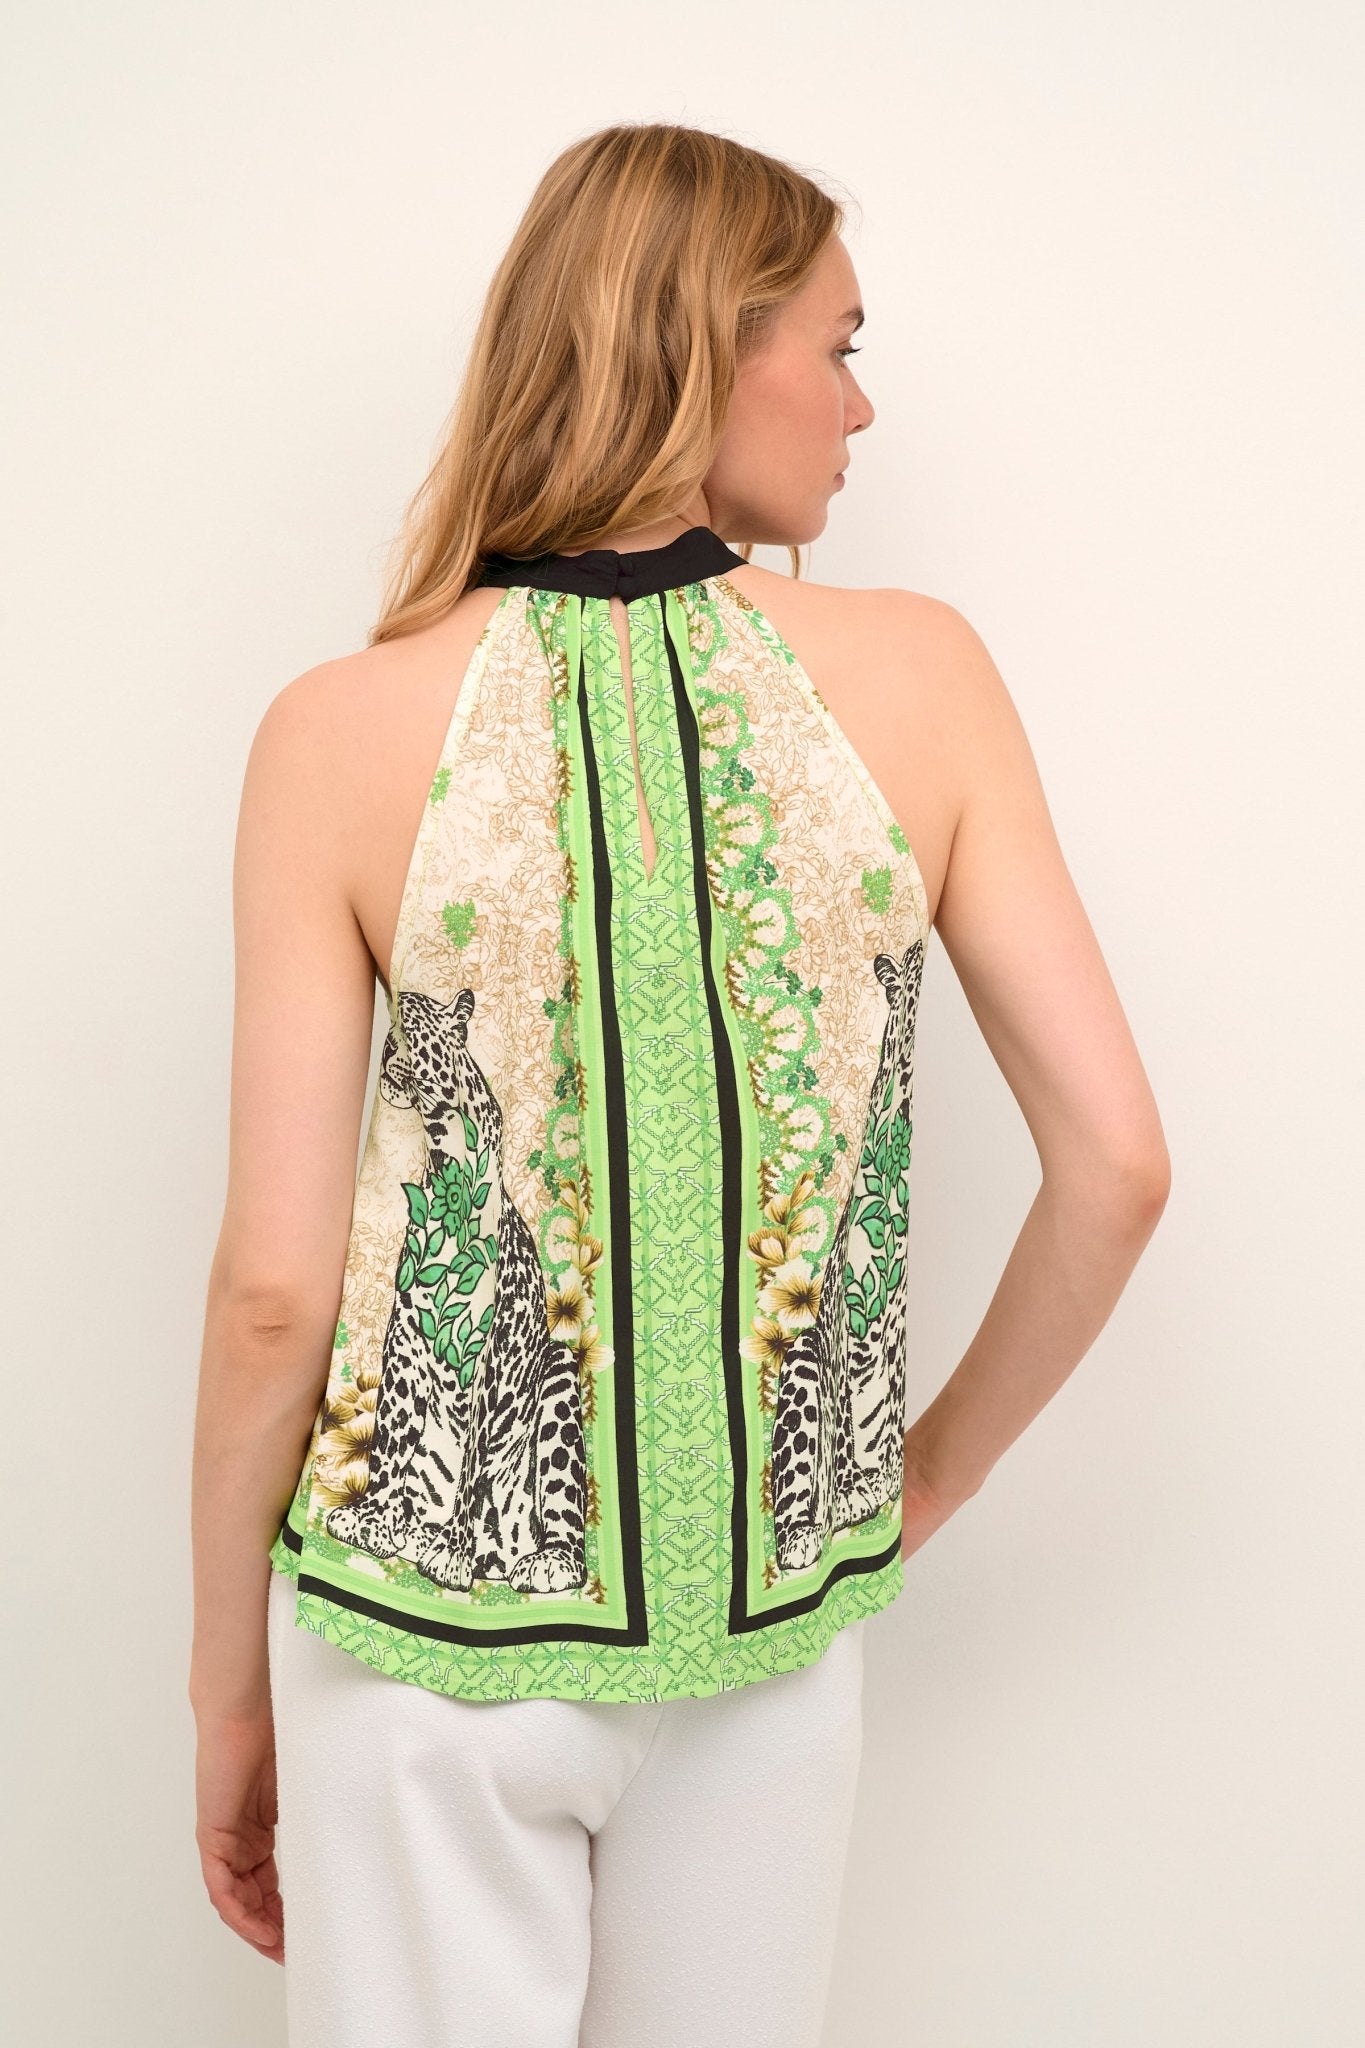 Anit blouse by Cream - Power Green Leopard - Blue Sky Fashions & Lingerie